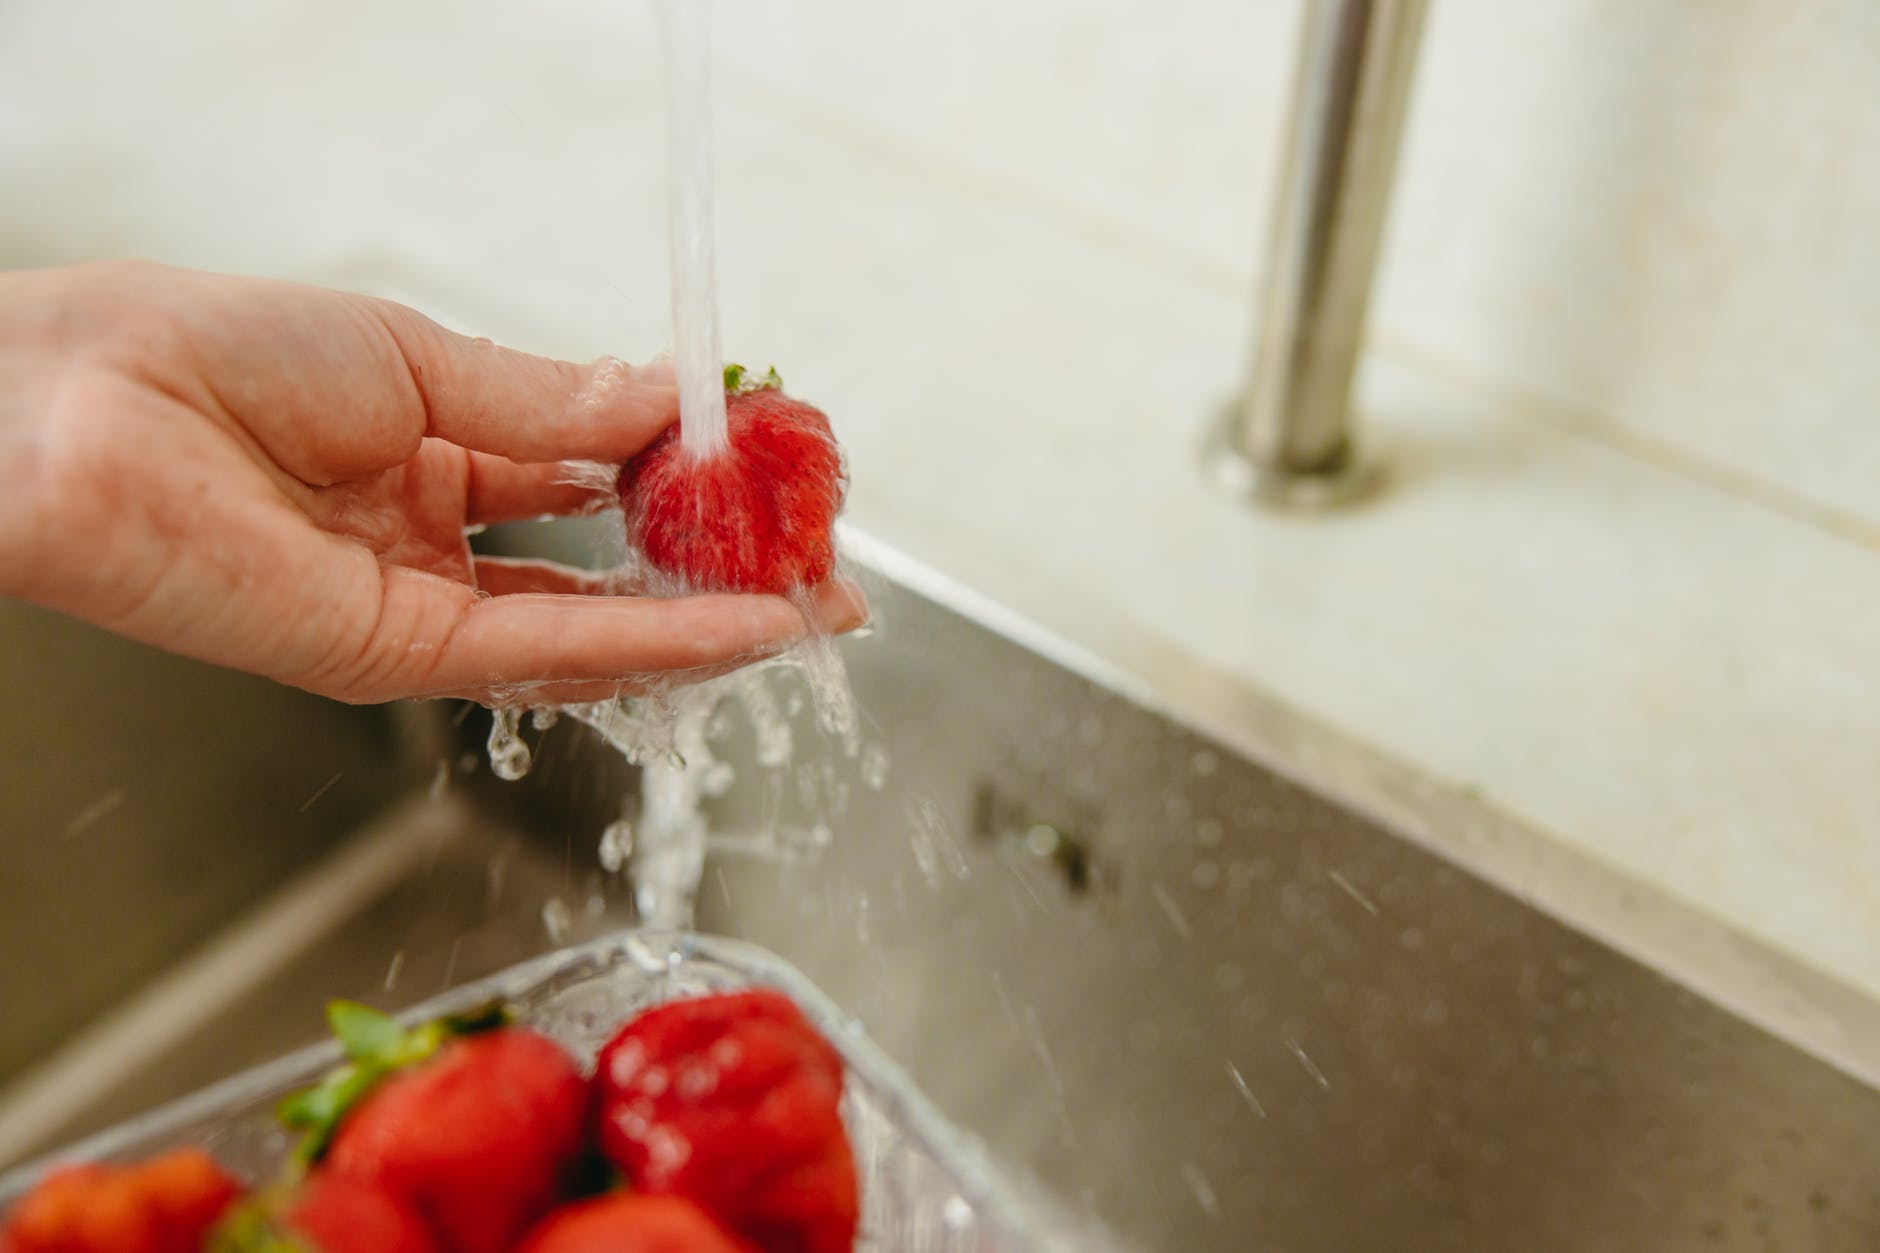 how to wash strawberries